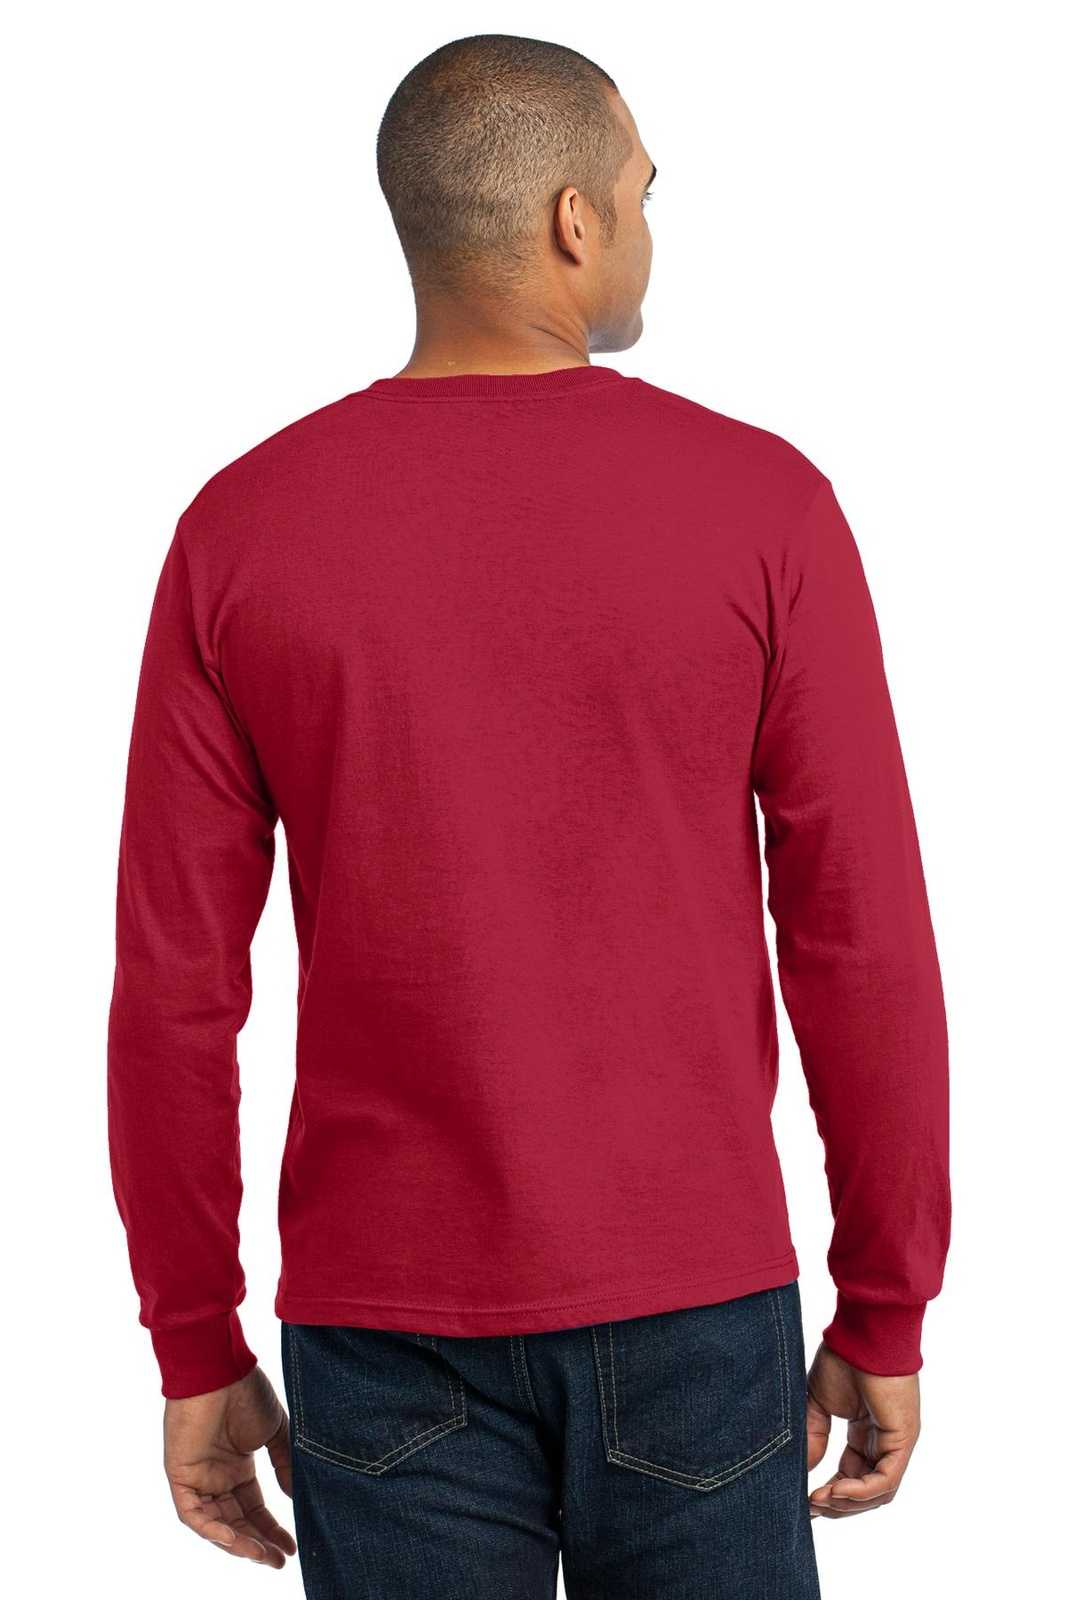 Port & Company USA100LS Long Sleeve All-American Tee - Red - HIT a Double - 1